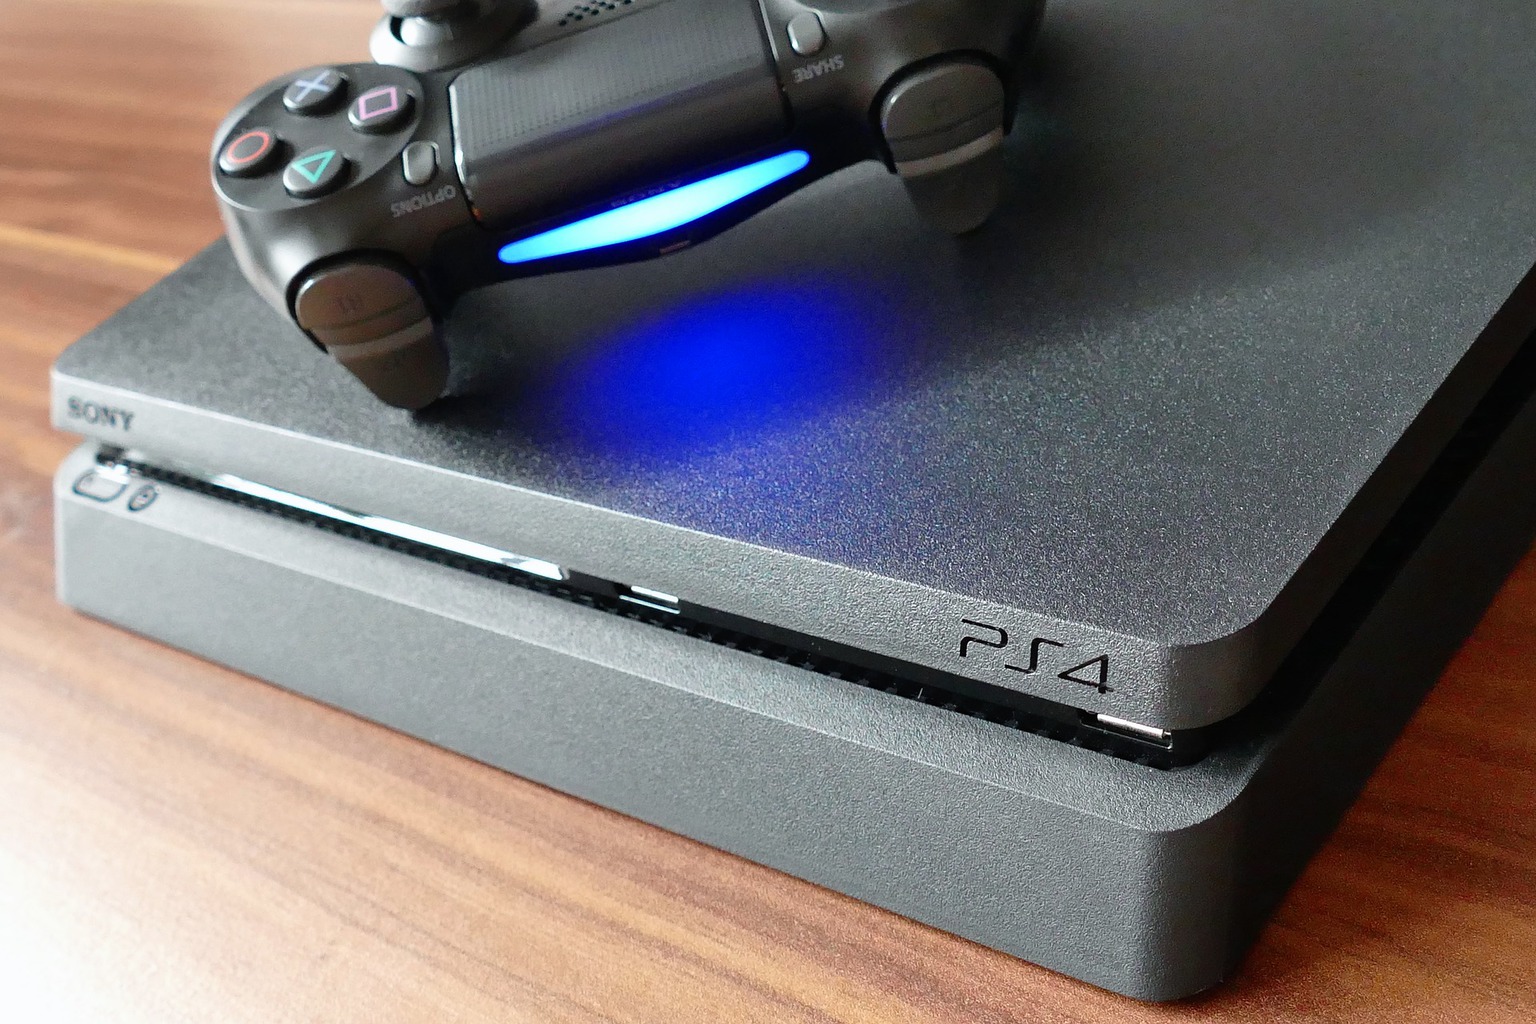 A controller and PS4 that could benefit from cooling stands